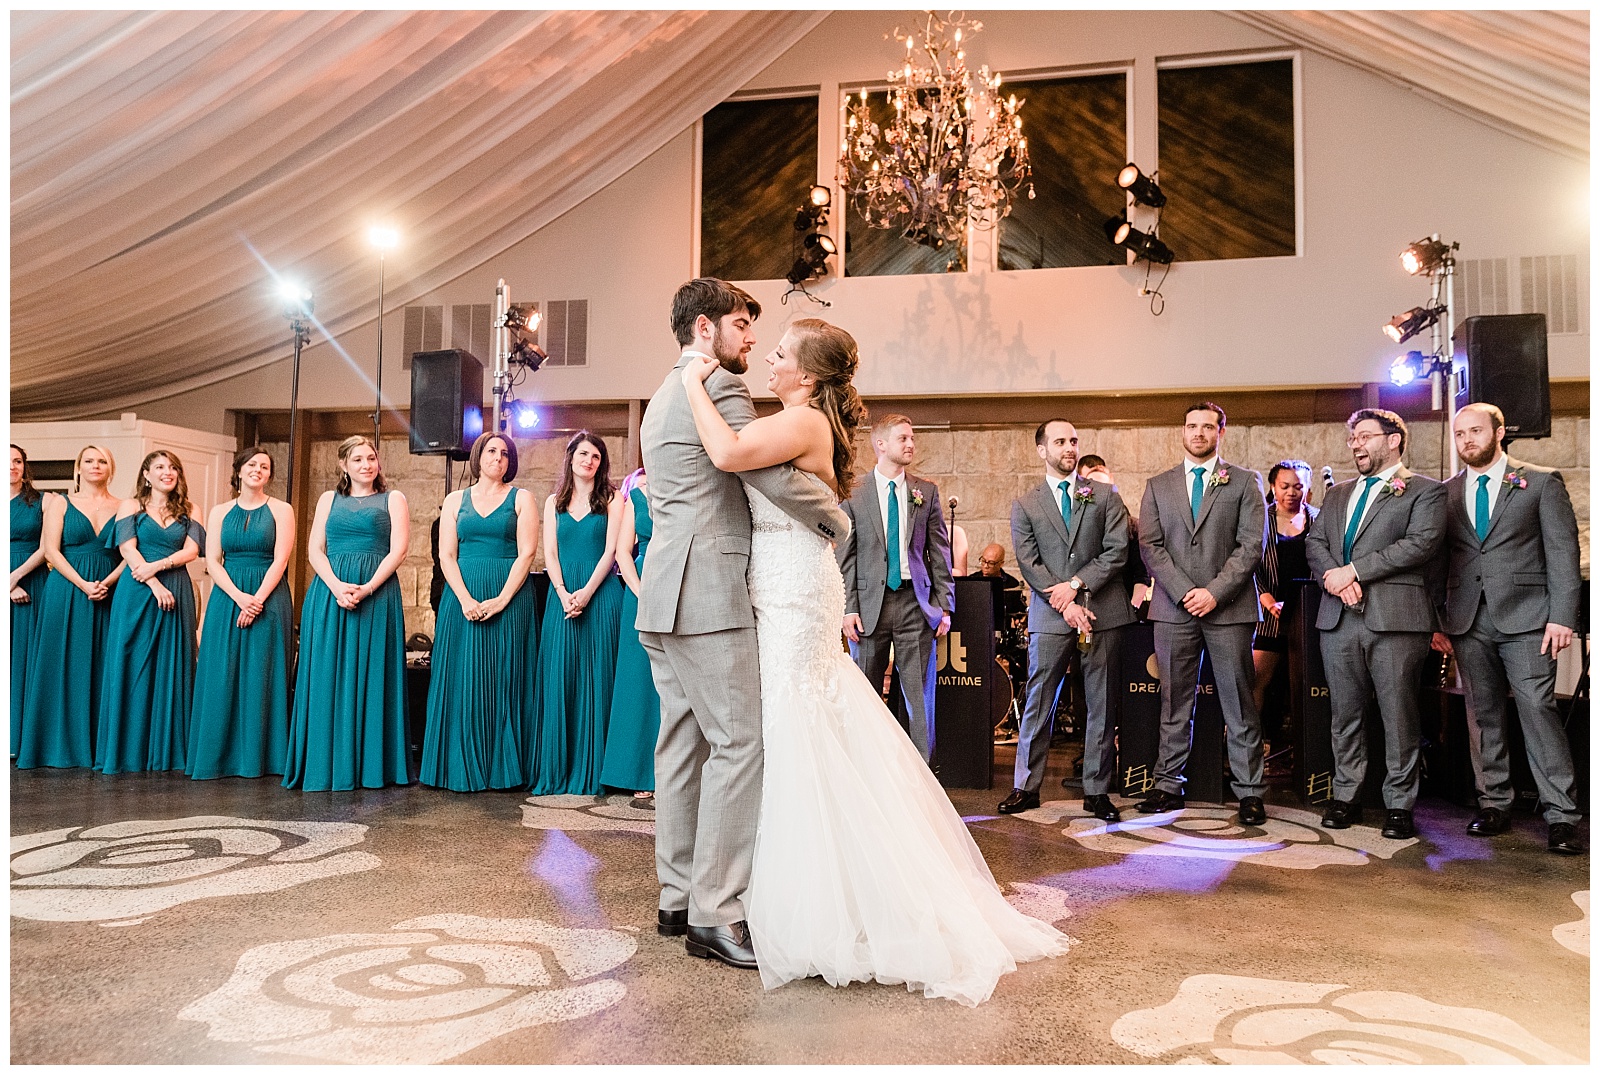 Bride and groom share a first dance on the dance floor of the ballroom at Lake House Inn.